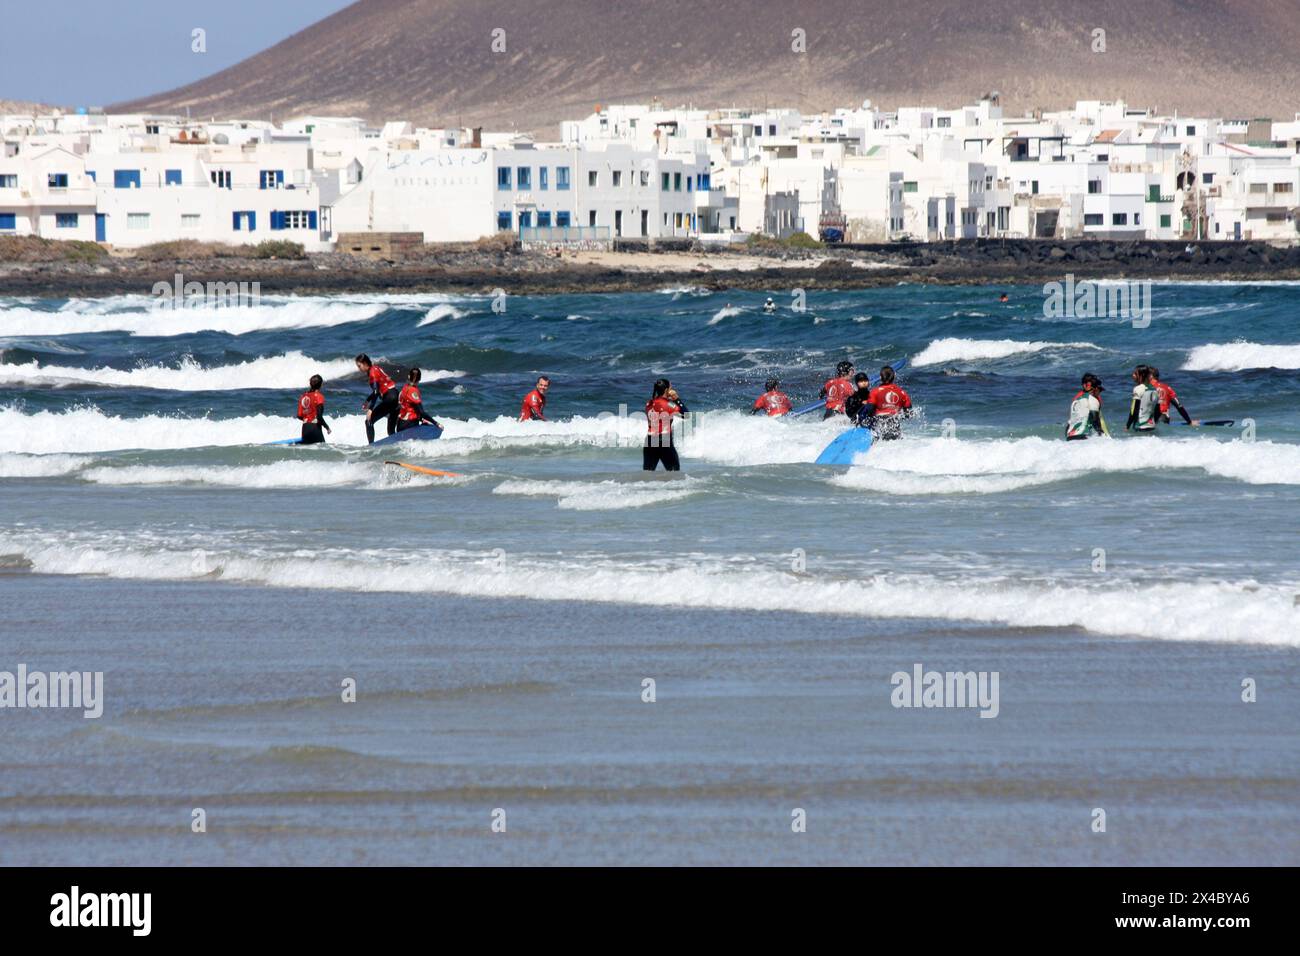 Surf schools on the beach at Famara Lanzarote Canary Islands Stock Photo